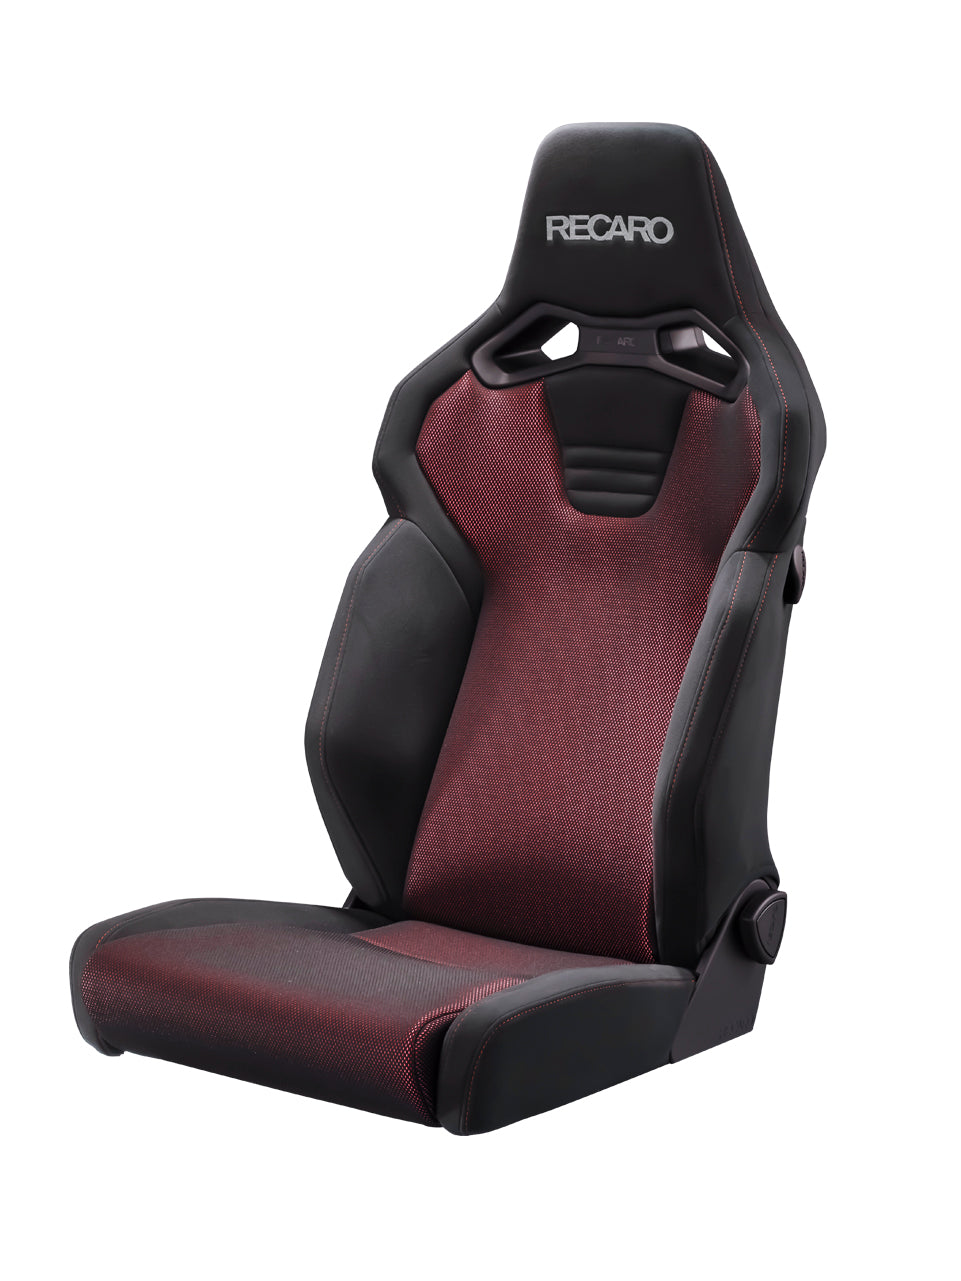 RECARO SR-C BK100H RD BK BRILLIANT MESH RED AND KAMUI BLACK COLOR WITH HEATED SEATS FOR  81-121.21.641-0